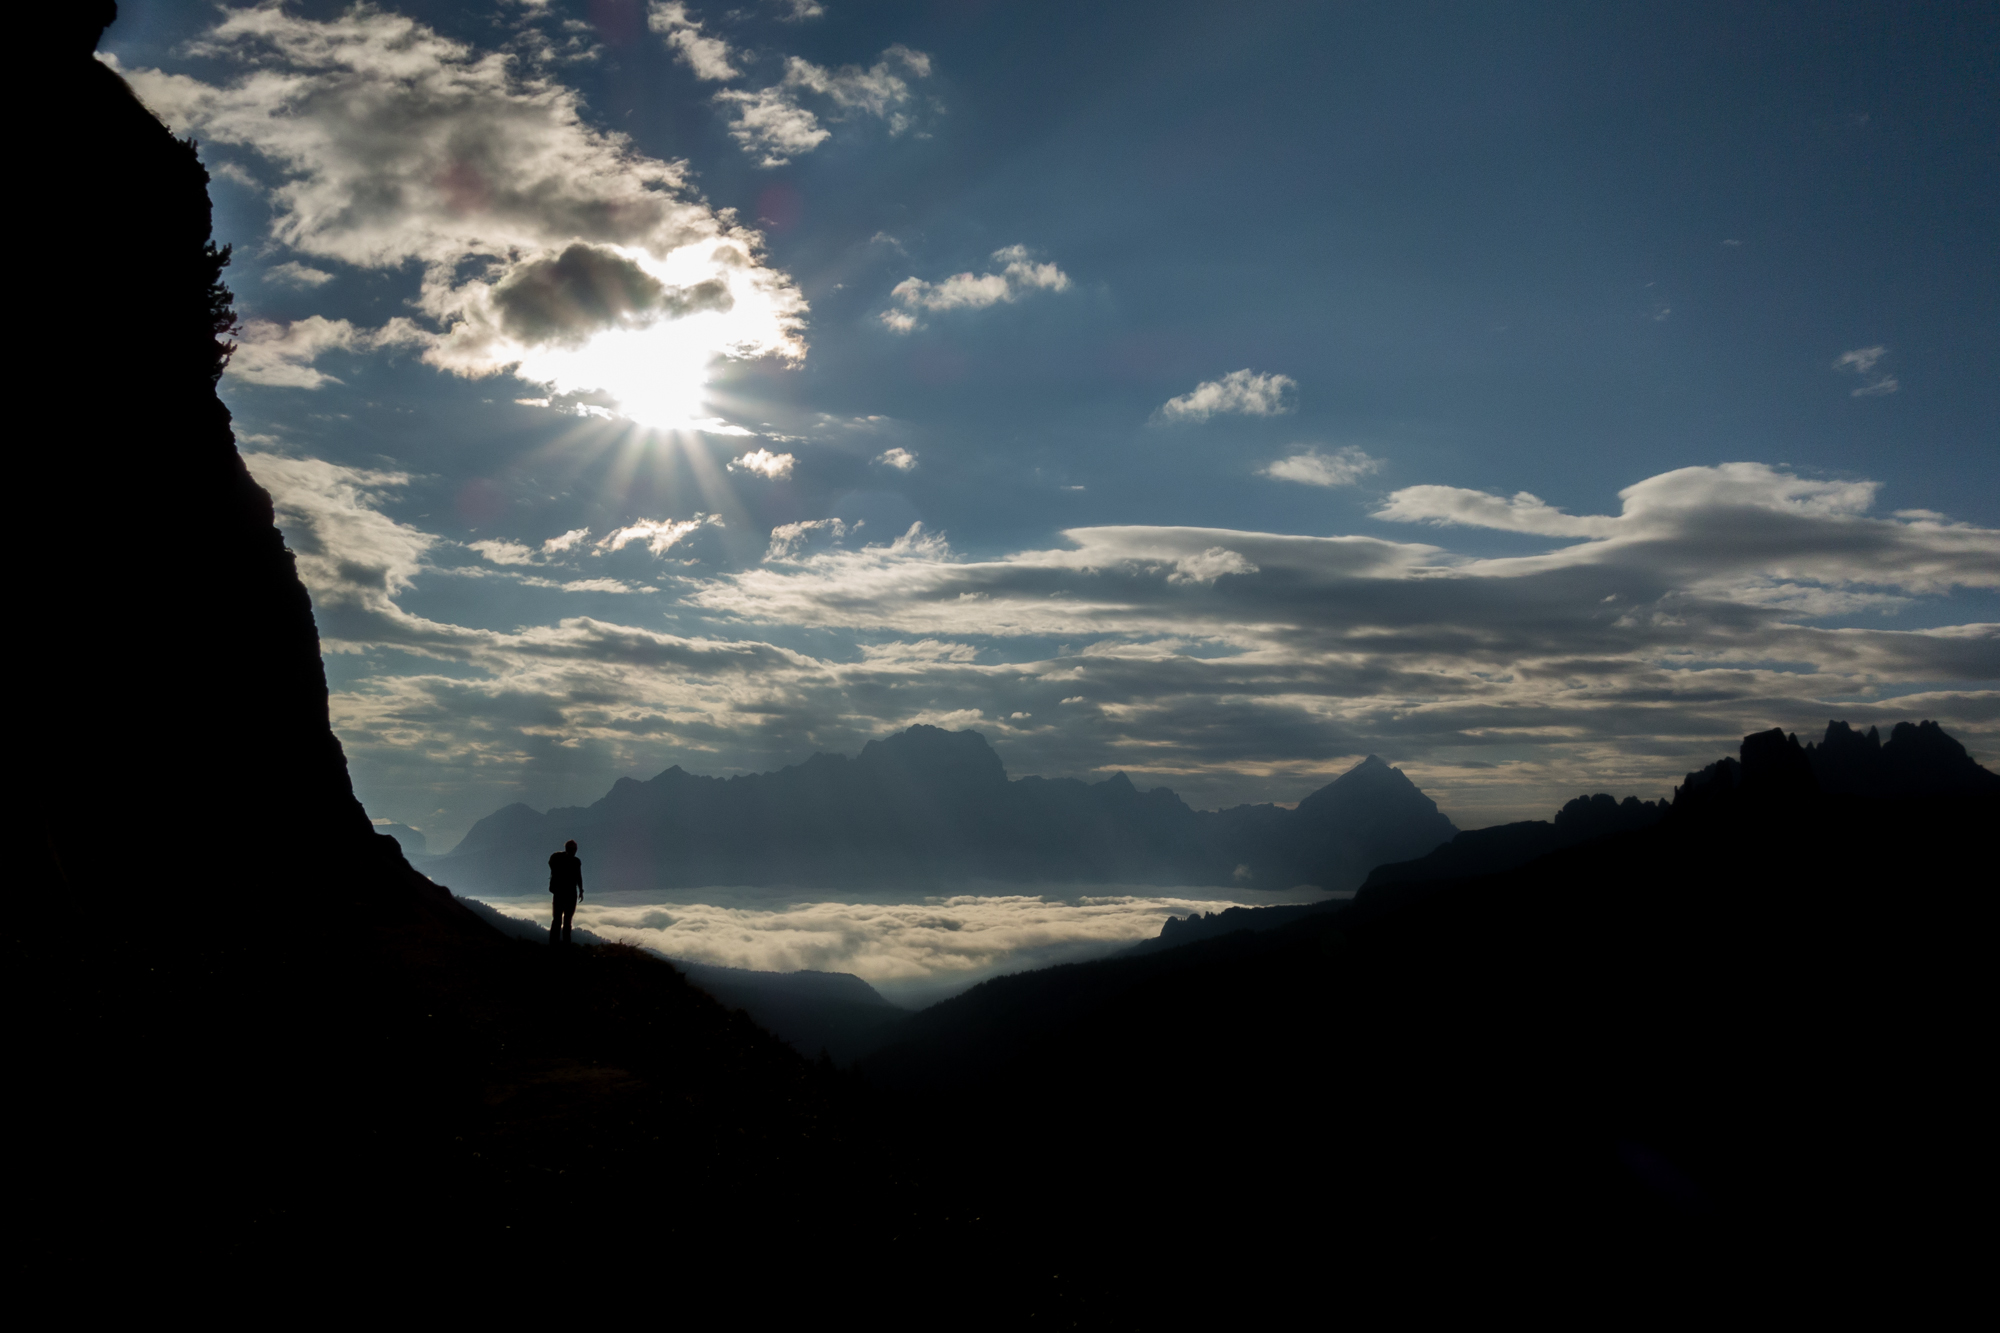 Surreal silhouetted scenes on the approach to the Dibona on Falzarego Grande, while Cortina hides beneath the clouds below